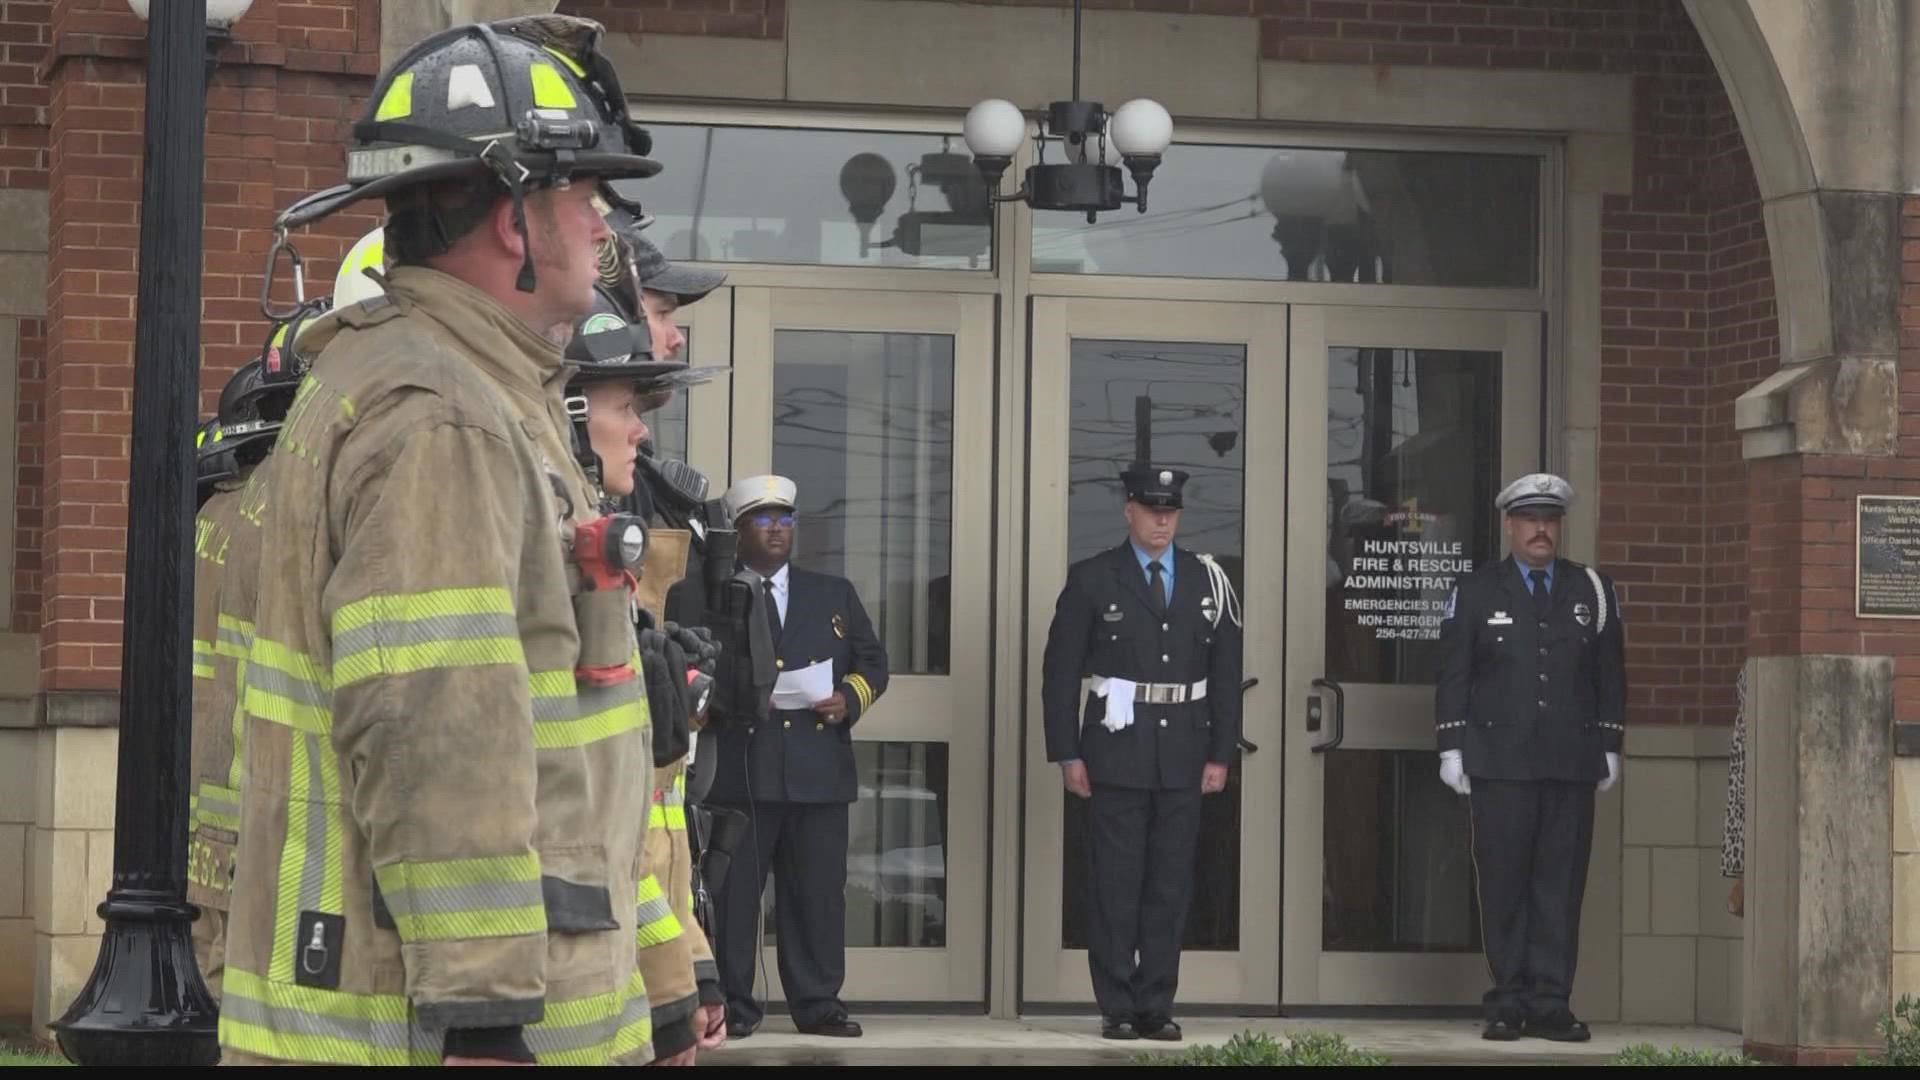 City of Huntsville's Mayor, local first responders and citizens gather together to remember the tragic events that took place on September 11, 2001.